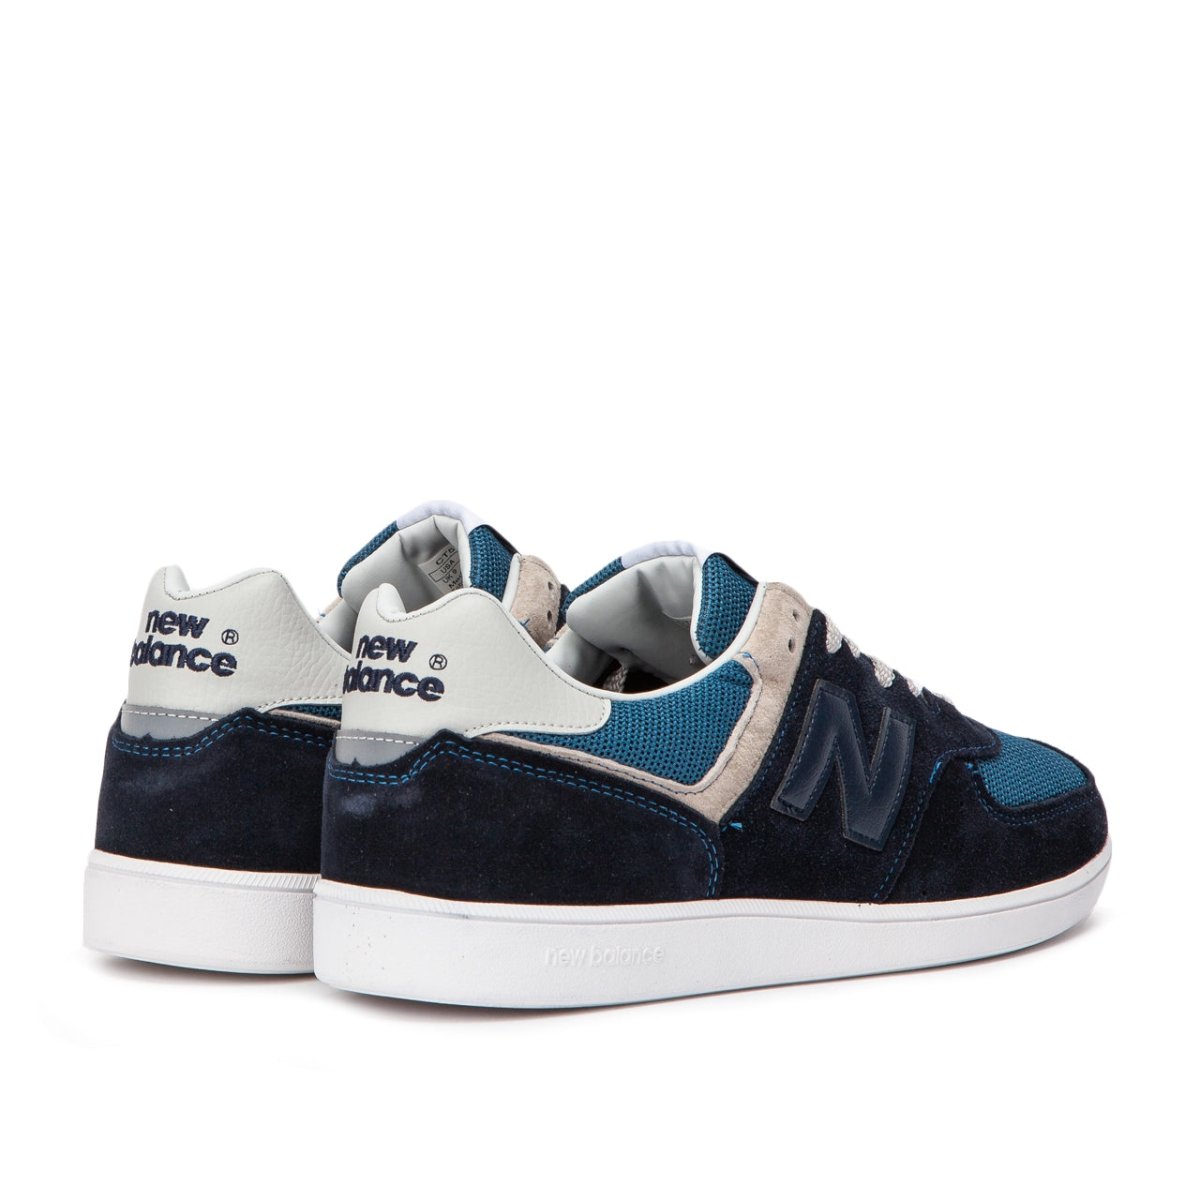 New Balance CT 576 OGN 'Made in England' (Navy / Grau)  - Allike Store